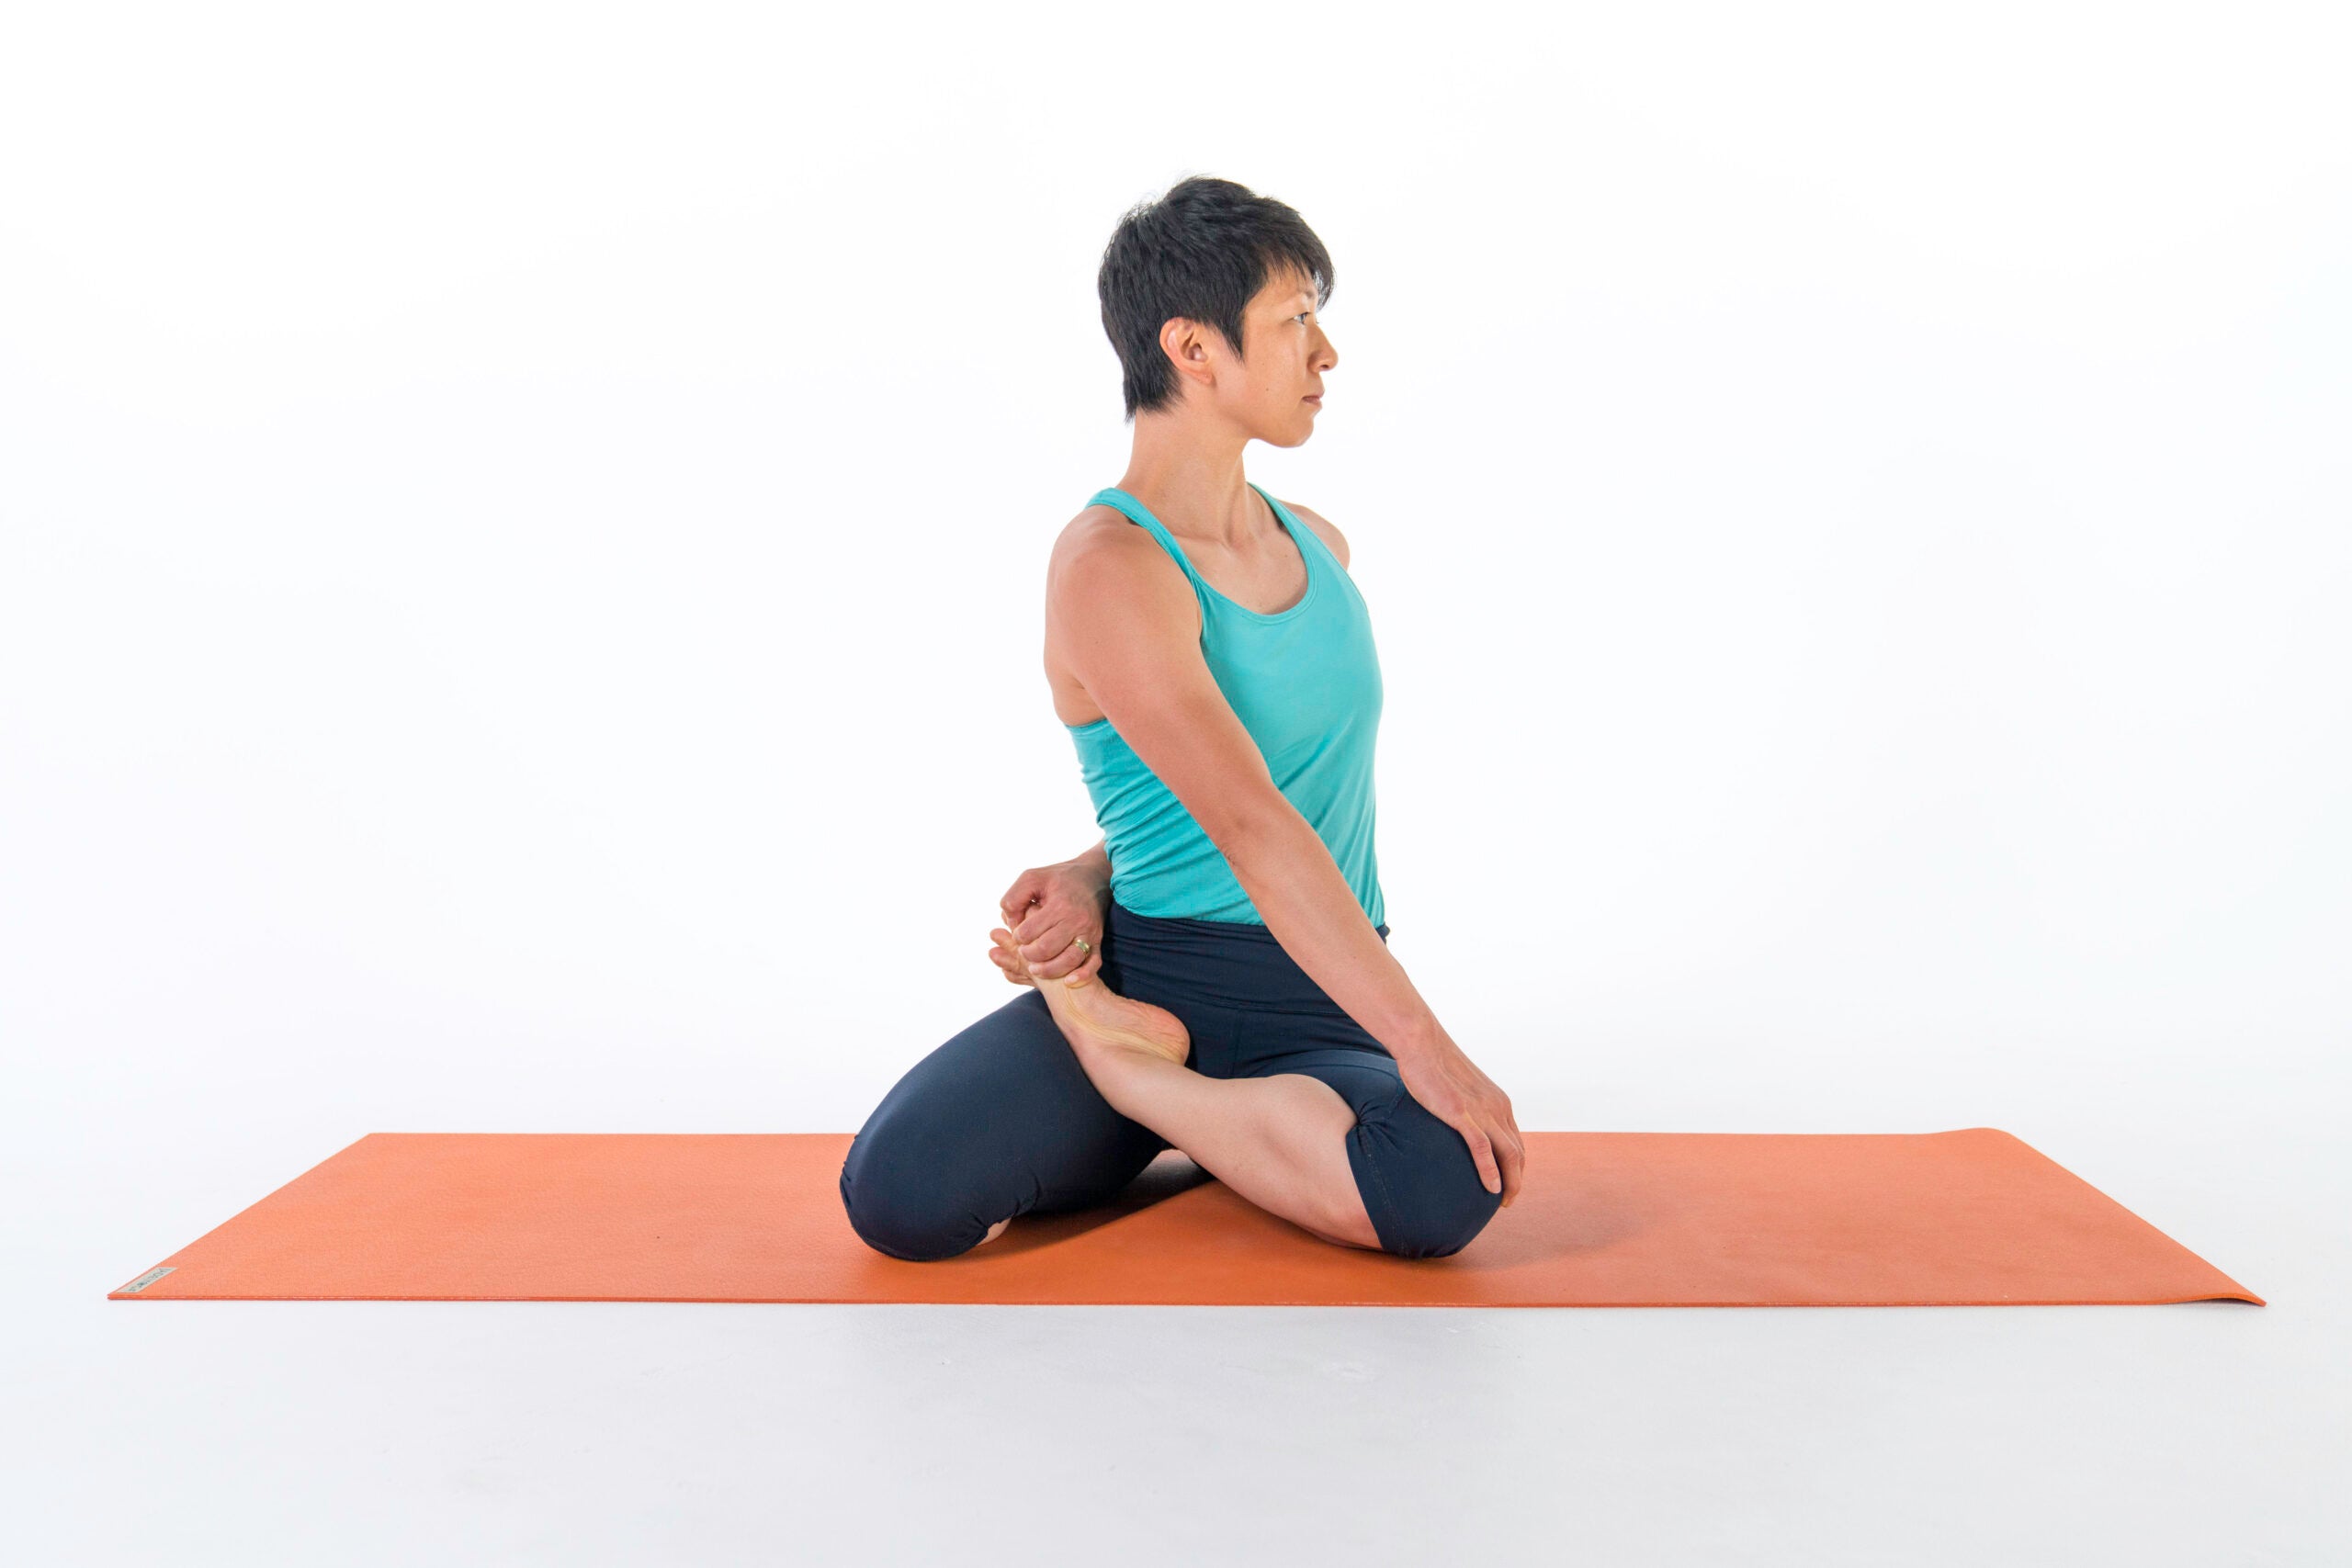 8 Yoga Poses For Gas To Reduce Bloating | Femina.in